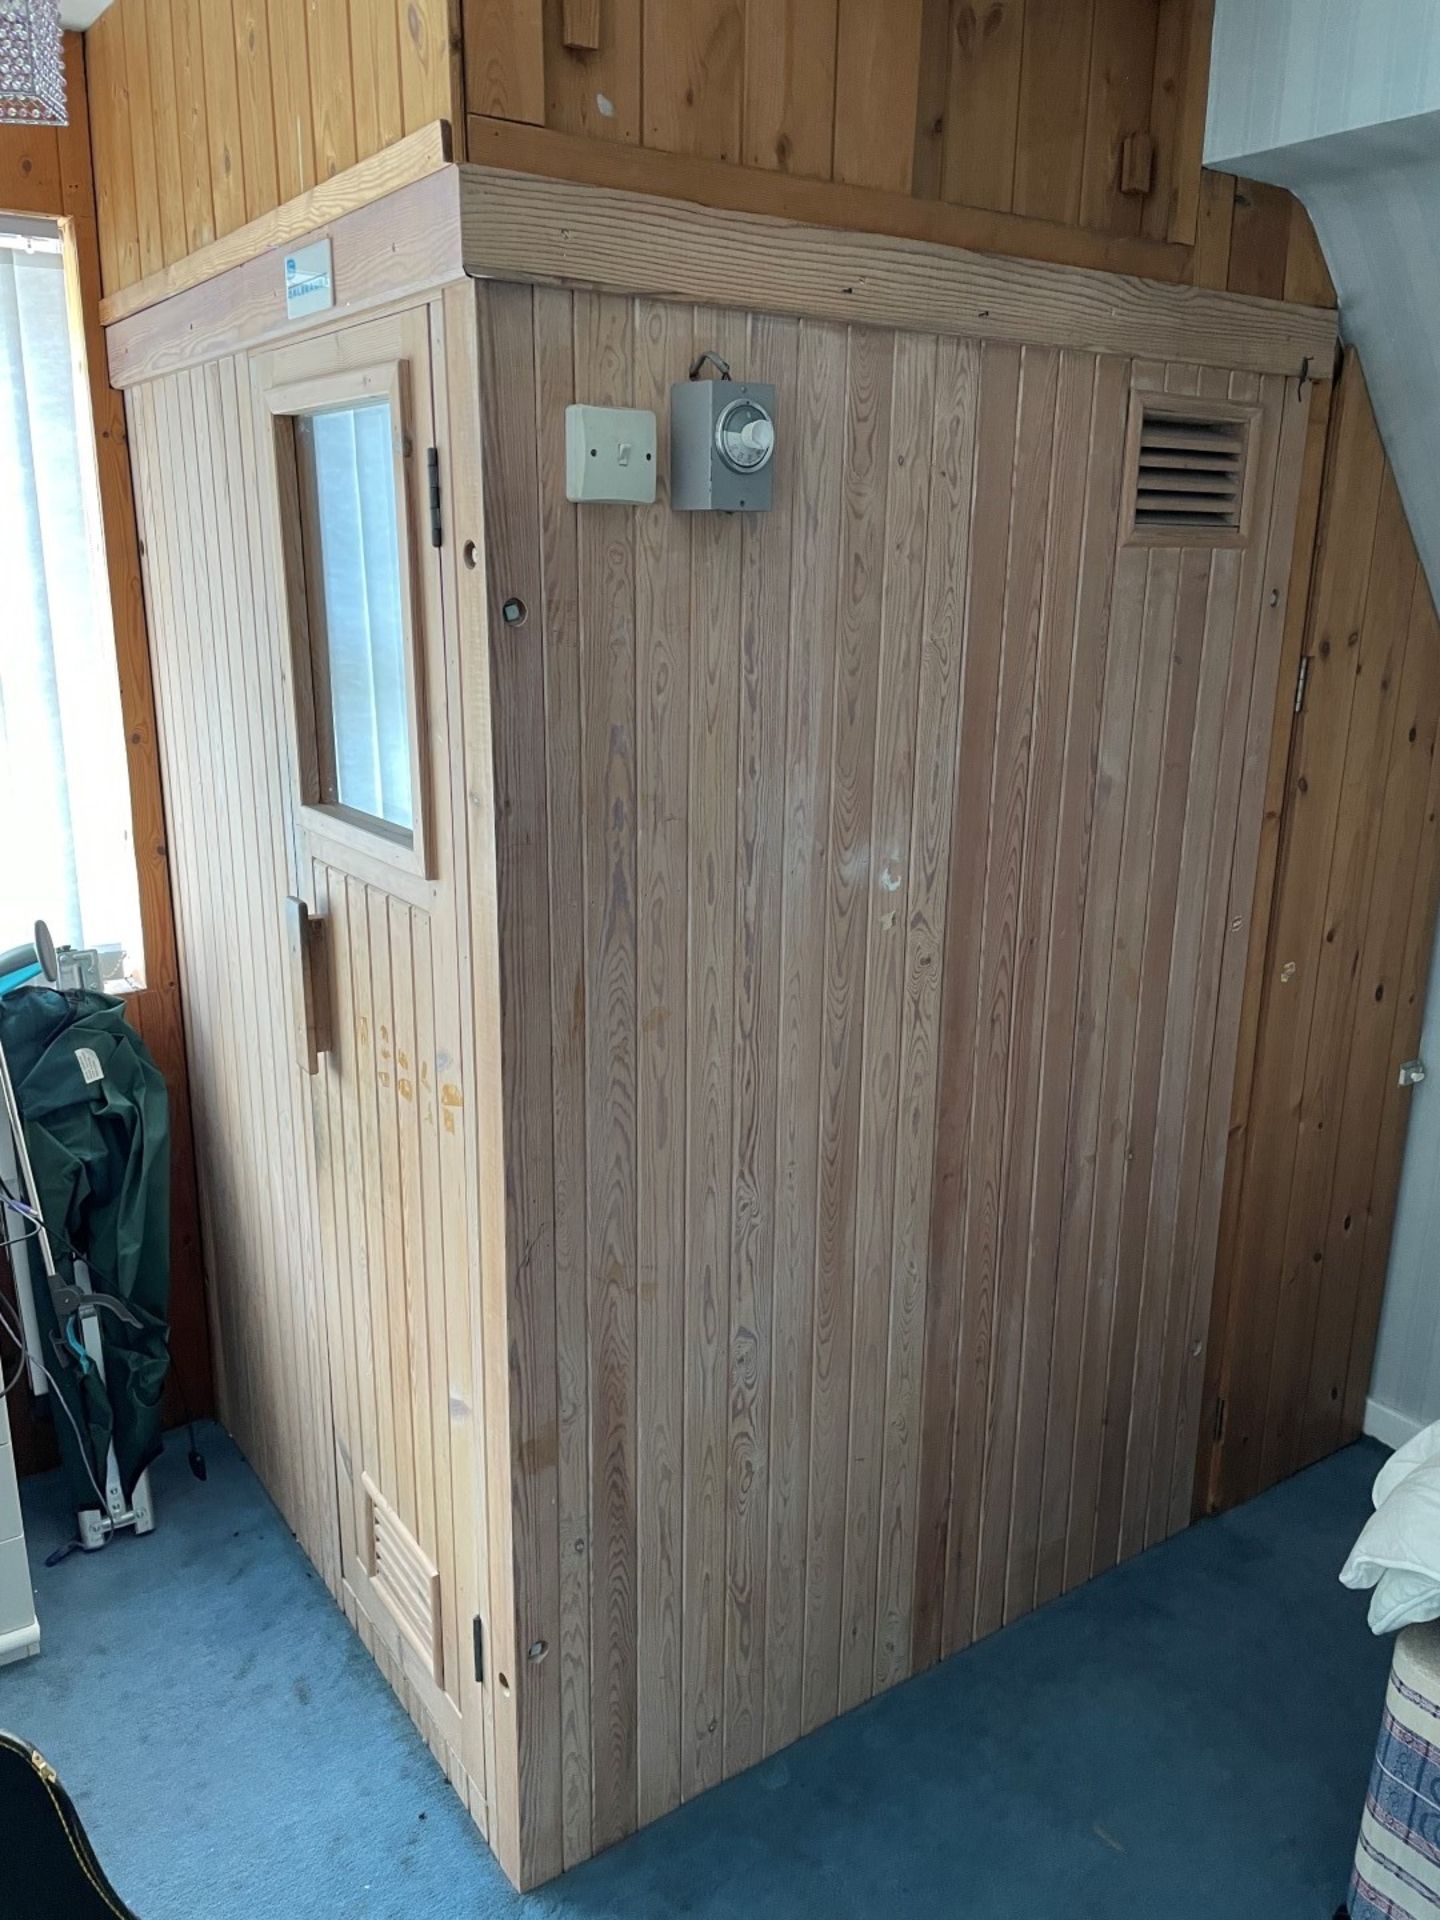 1 x DALESAUNA Wooden Indoor Sauna - Dimensions: 128 x 122.5 x H187cm - From An Exclusive Property In - Image 10 of 12